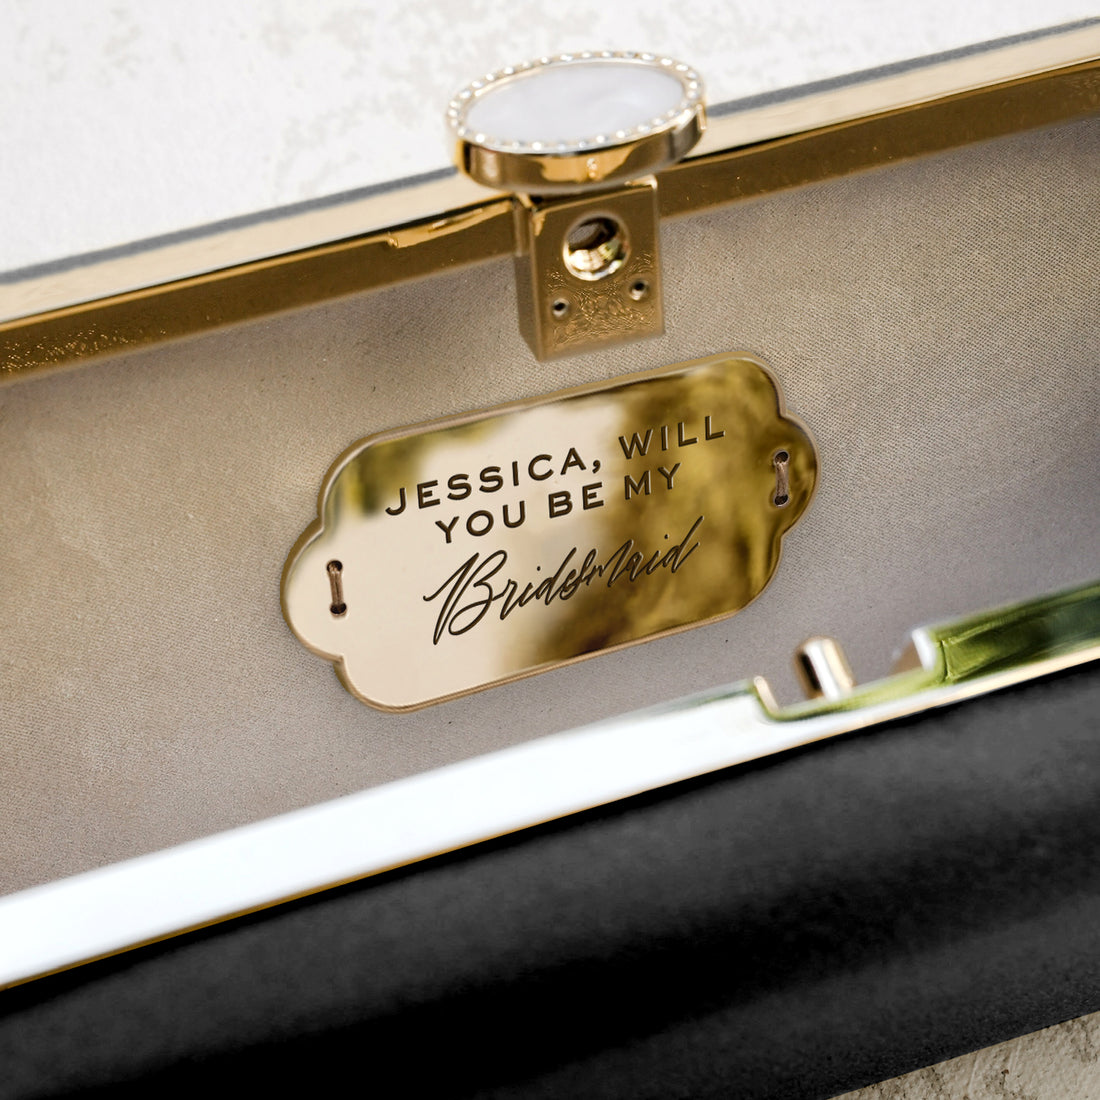 A customized Bridesmaid Proposal Box with Engraved Bella 'Be My Bridesmaid' Clutch Bag Gift in black and gold, with the words "Jessica, will you be my bridesmaid?" by The Bella Rosa Collection.